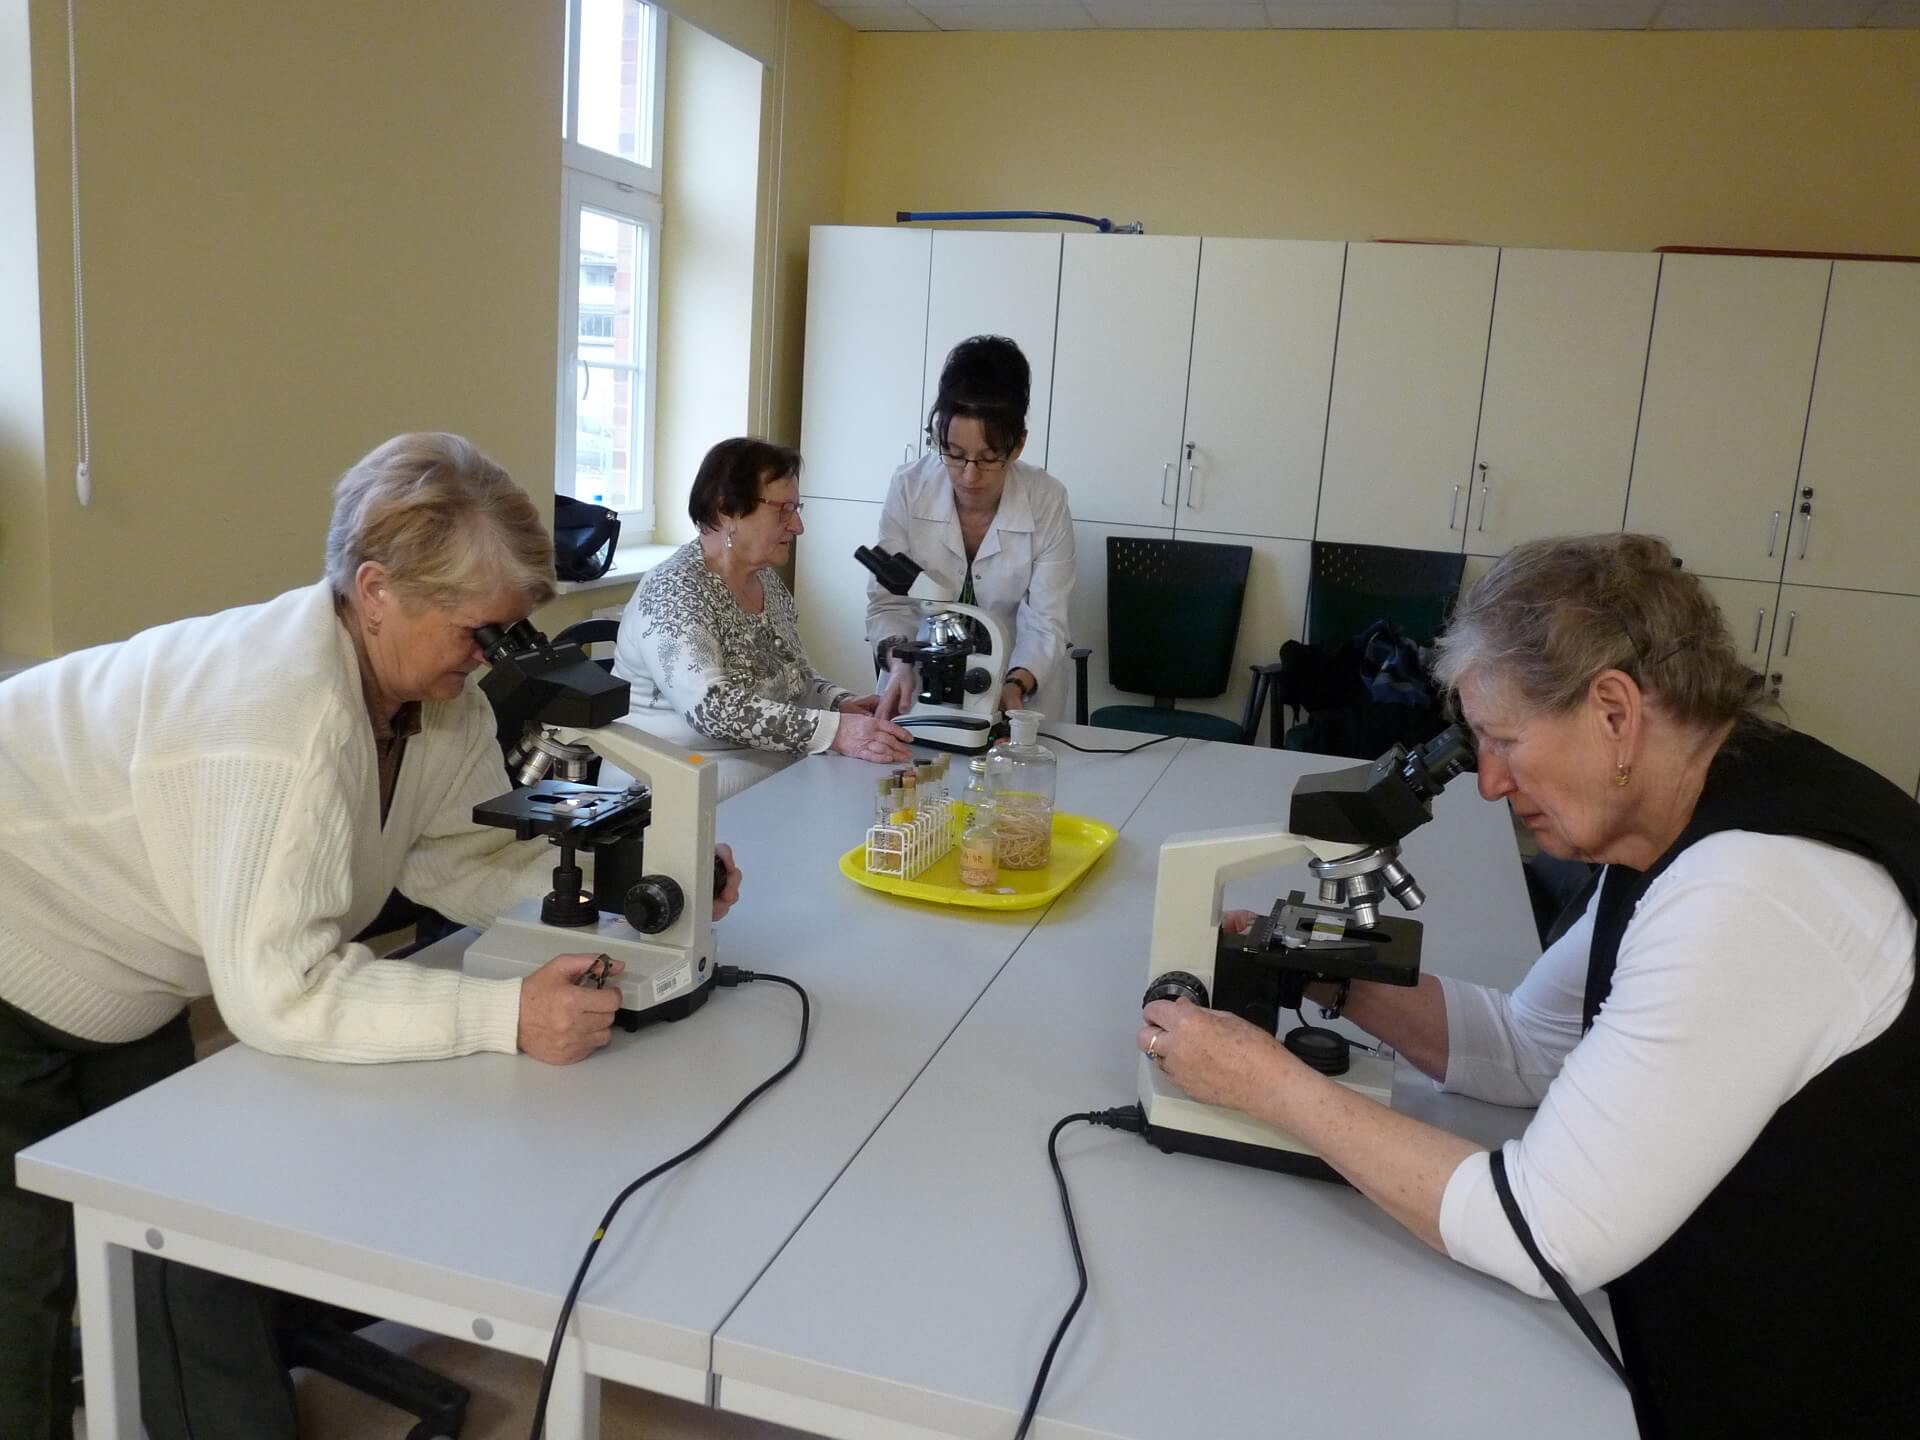 Classes at the Faculty of Biotechnology and Animal Breeding with the participation of a group of seniors. Three ladies are observing microscopes under the watchful eye of a guide wearing a white smock